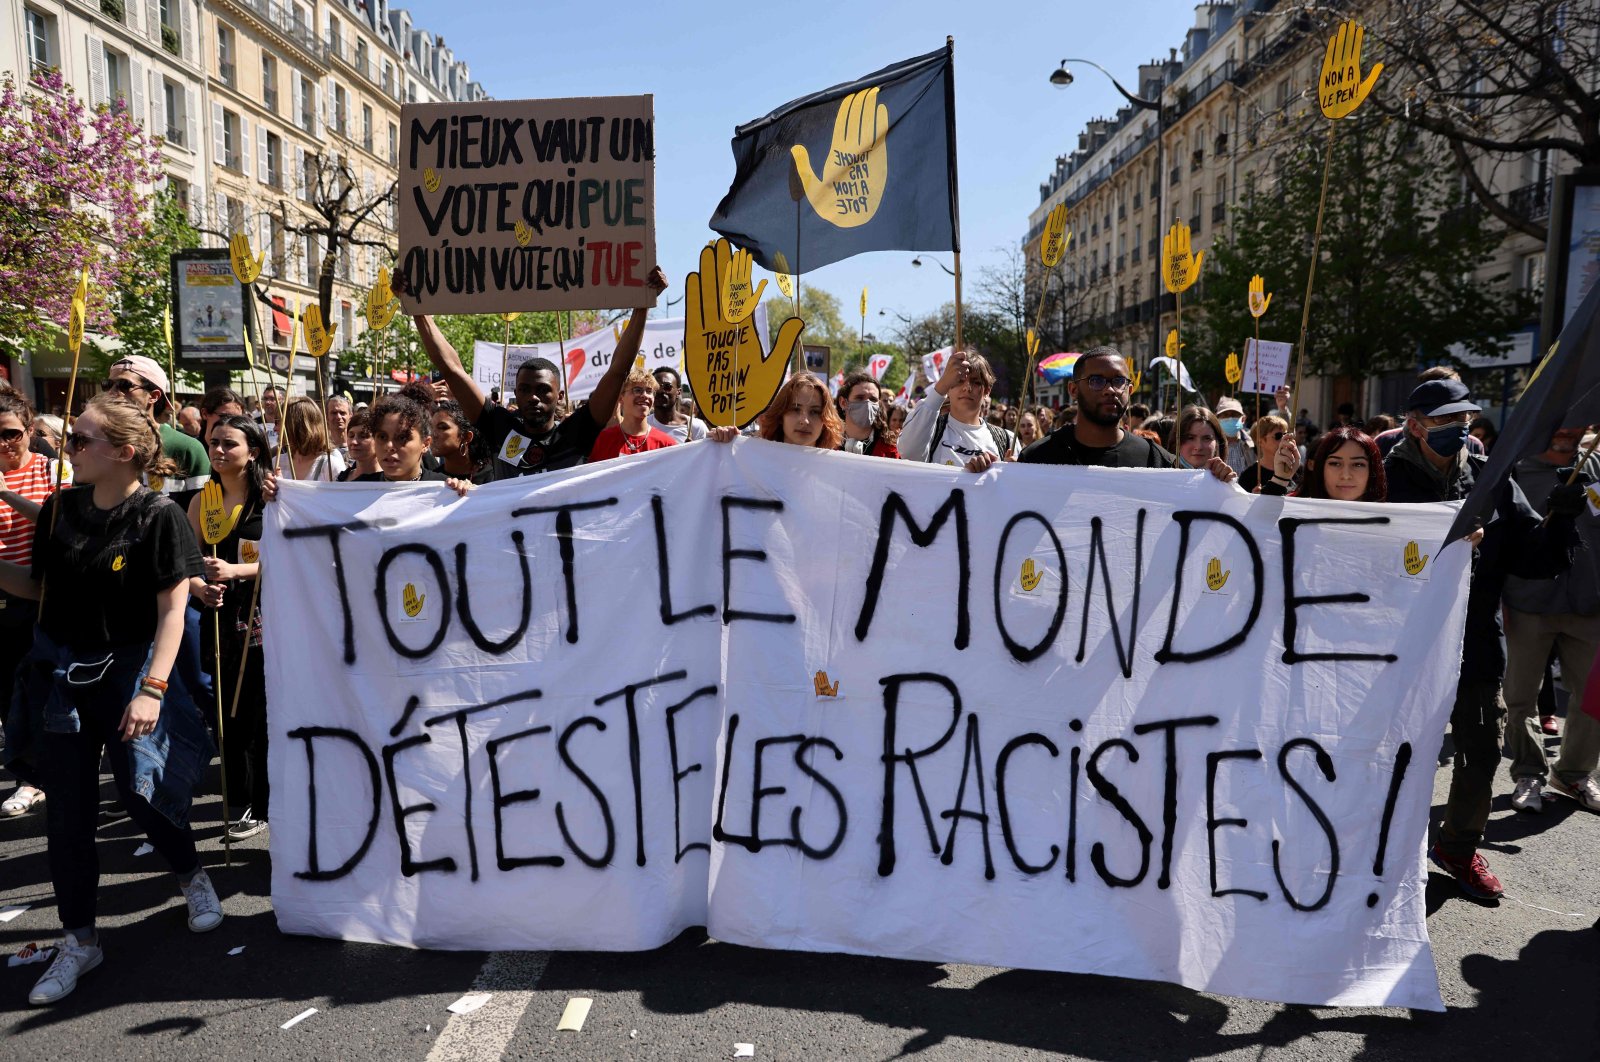 Protestors march behind a banner that translates as &quot;everybody hates racists&quot; during a demonstration against racism and fascism in Paris on April 16, 2022. (AFP Photo)